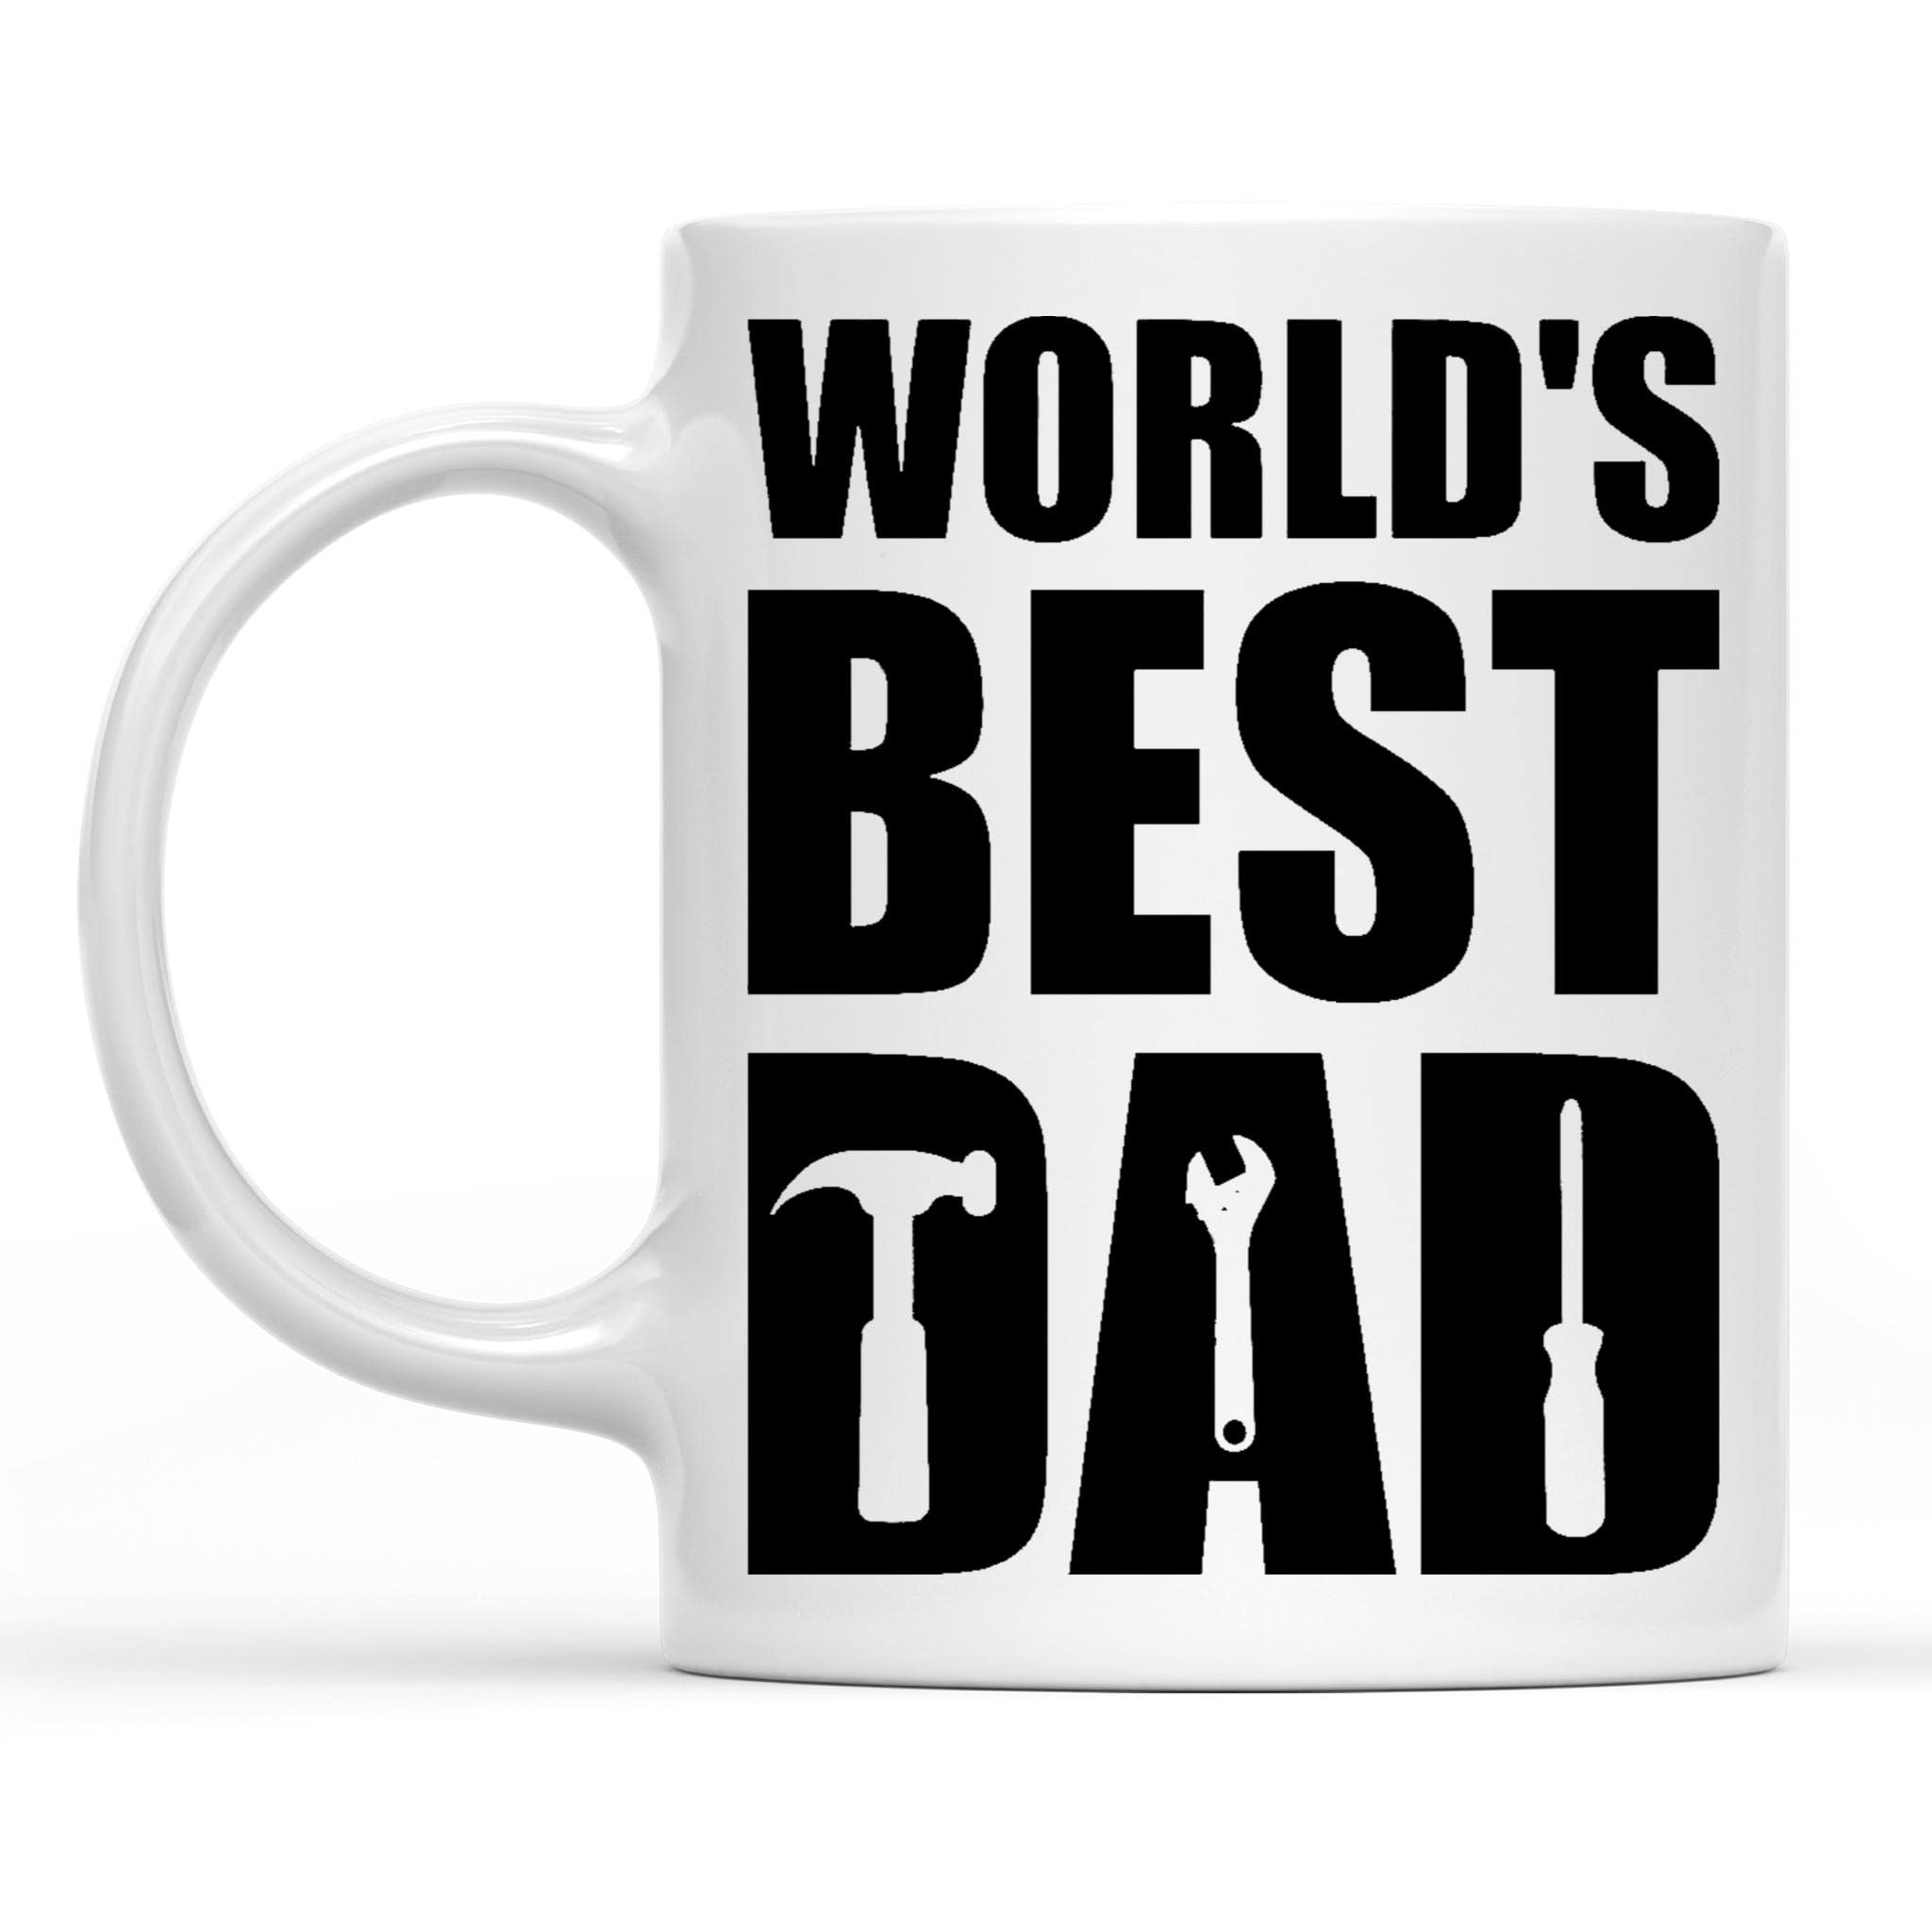 Father holding a World's Best Dad mug